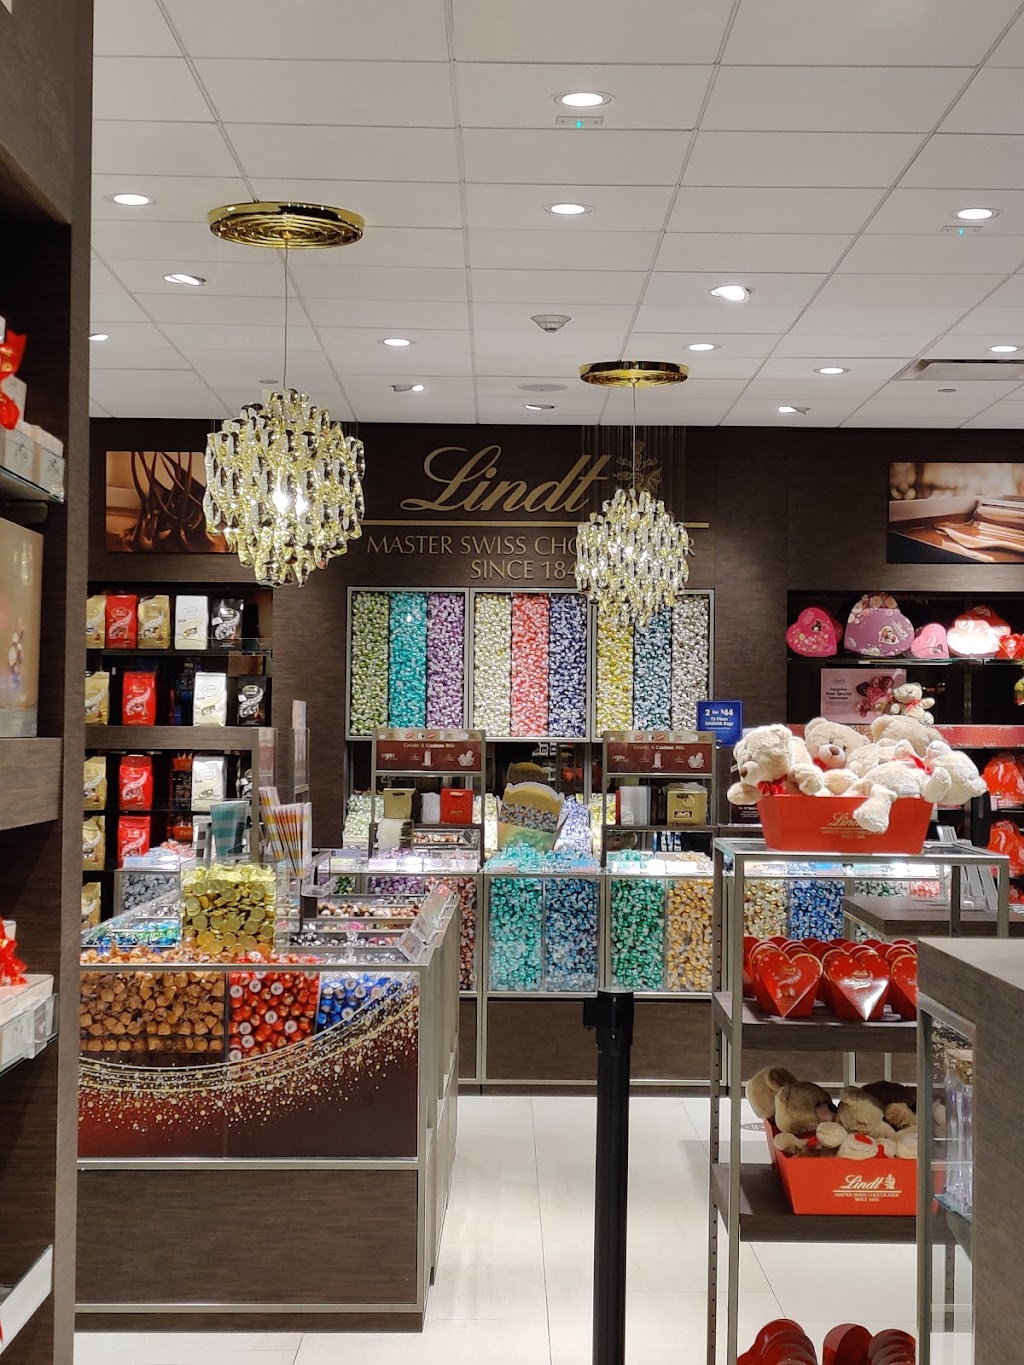 Lindt Chocolate Shop | Hamptons District, 498 Red Apple Ct Suite 441B, Central Valley, NY 10917 | Phone: (845) 928-2123